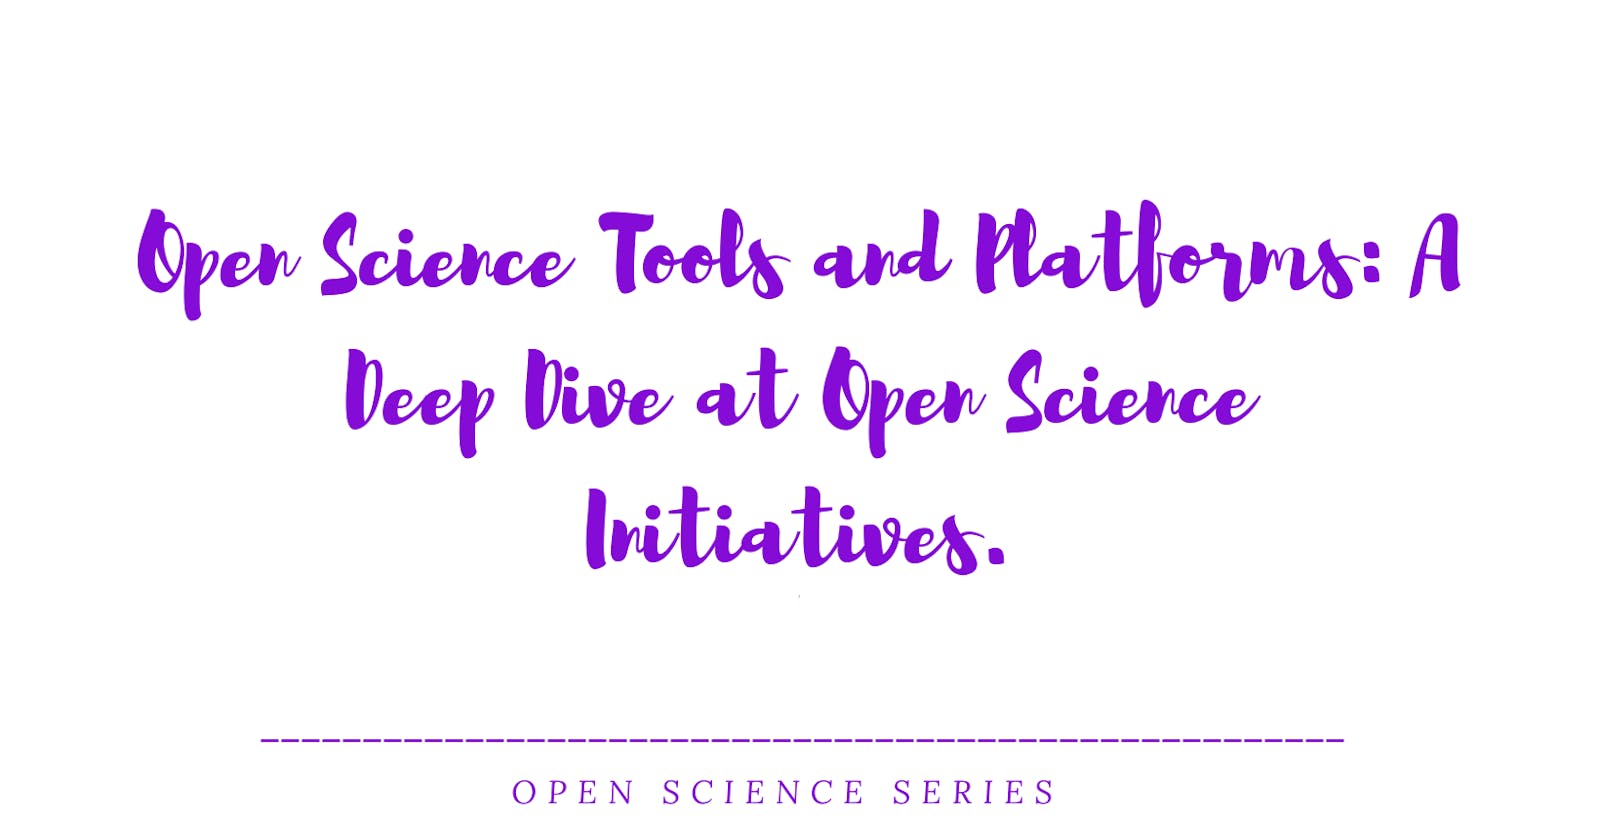 Open Science Tools and Platforms: A Deep Dive at Open Science Initiatives.